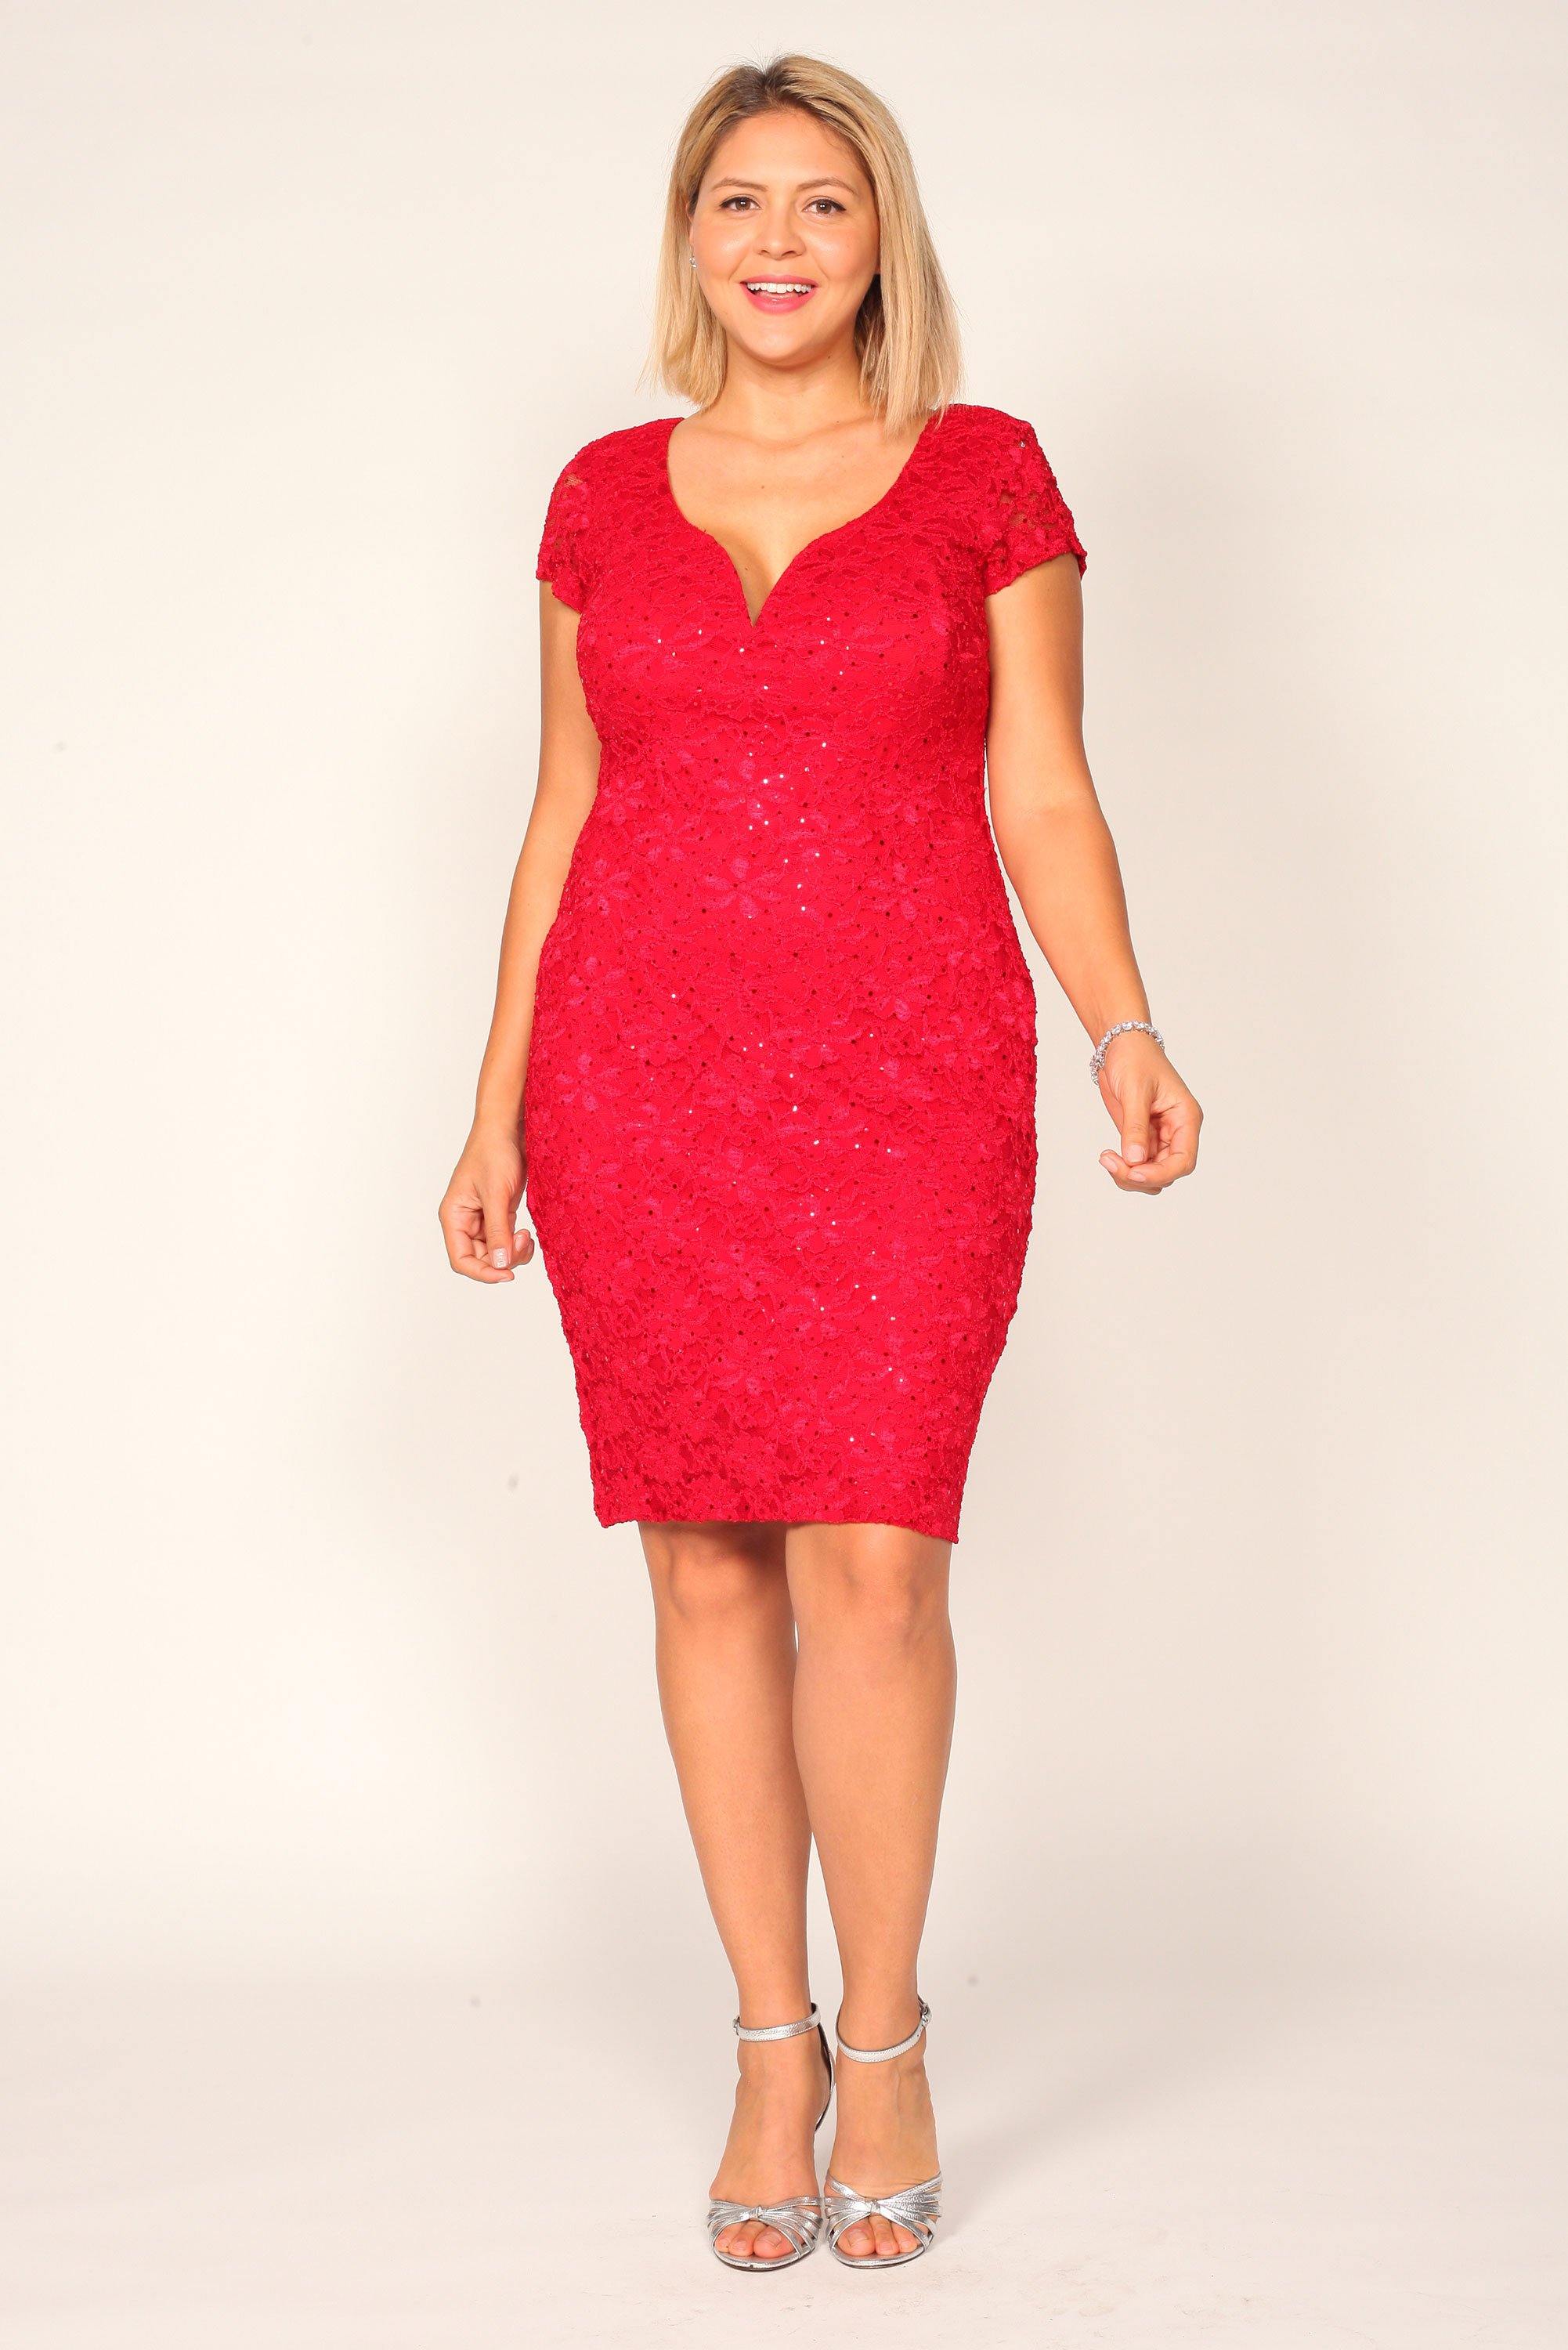 Connected Apparel Short Fitted Lace Dress Cocktail - The Dress Outlet